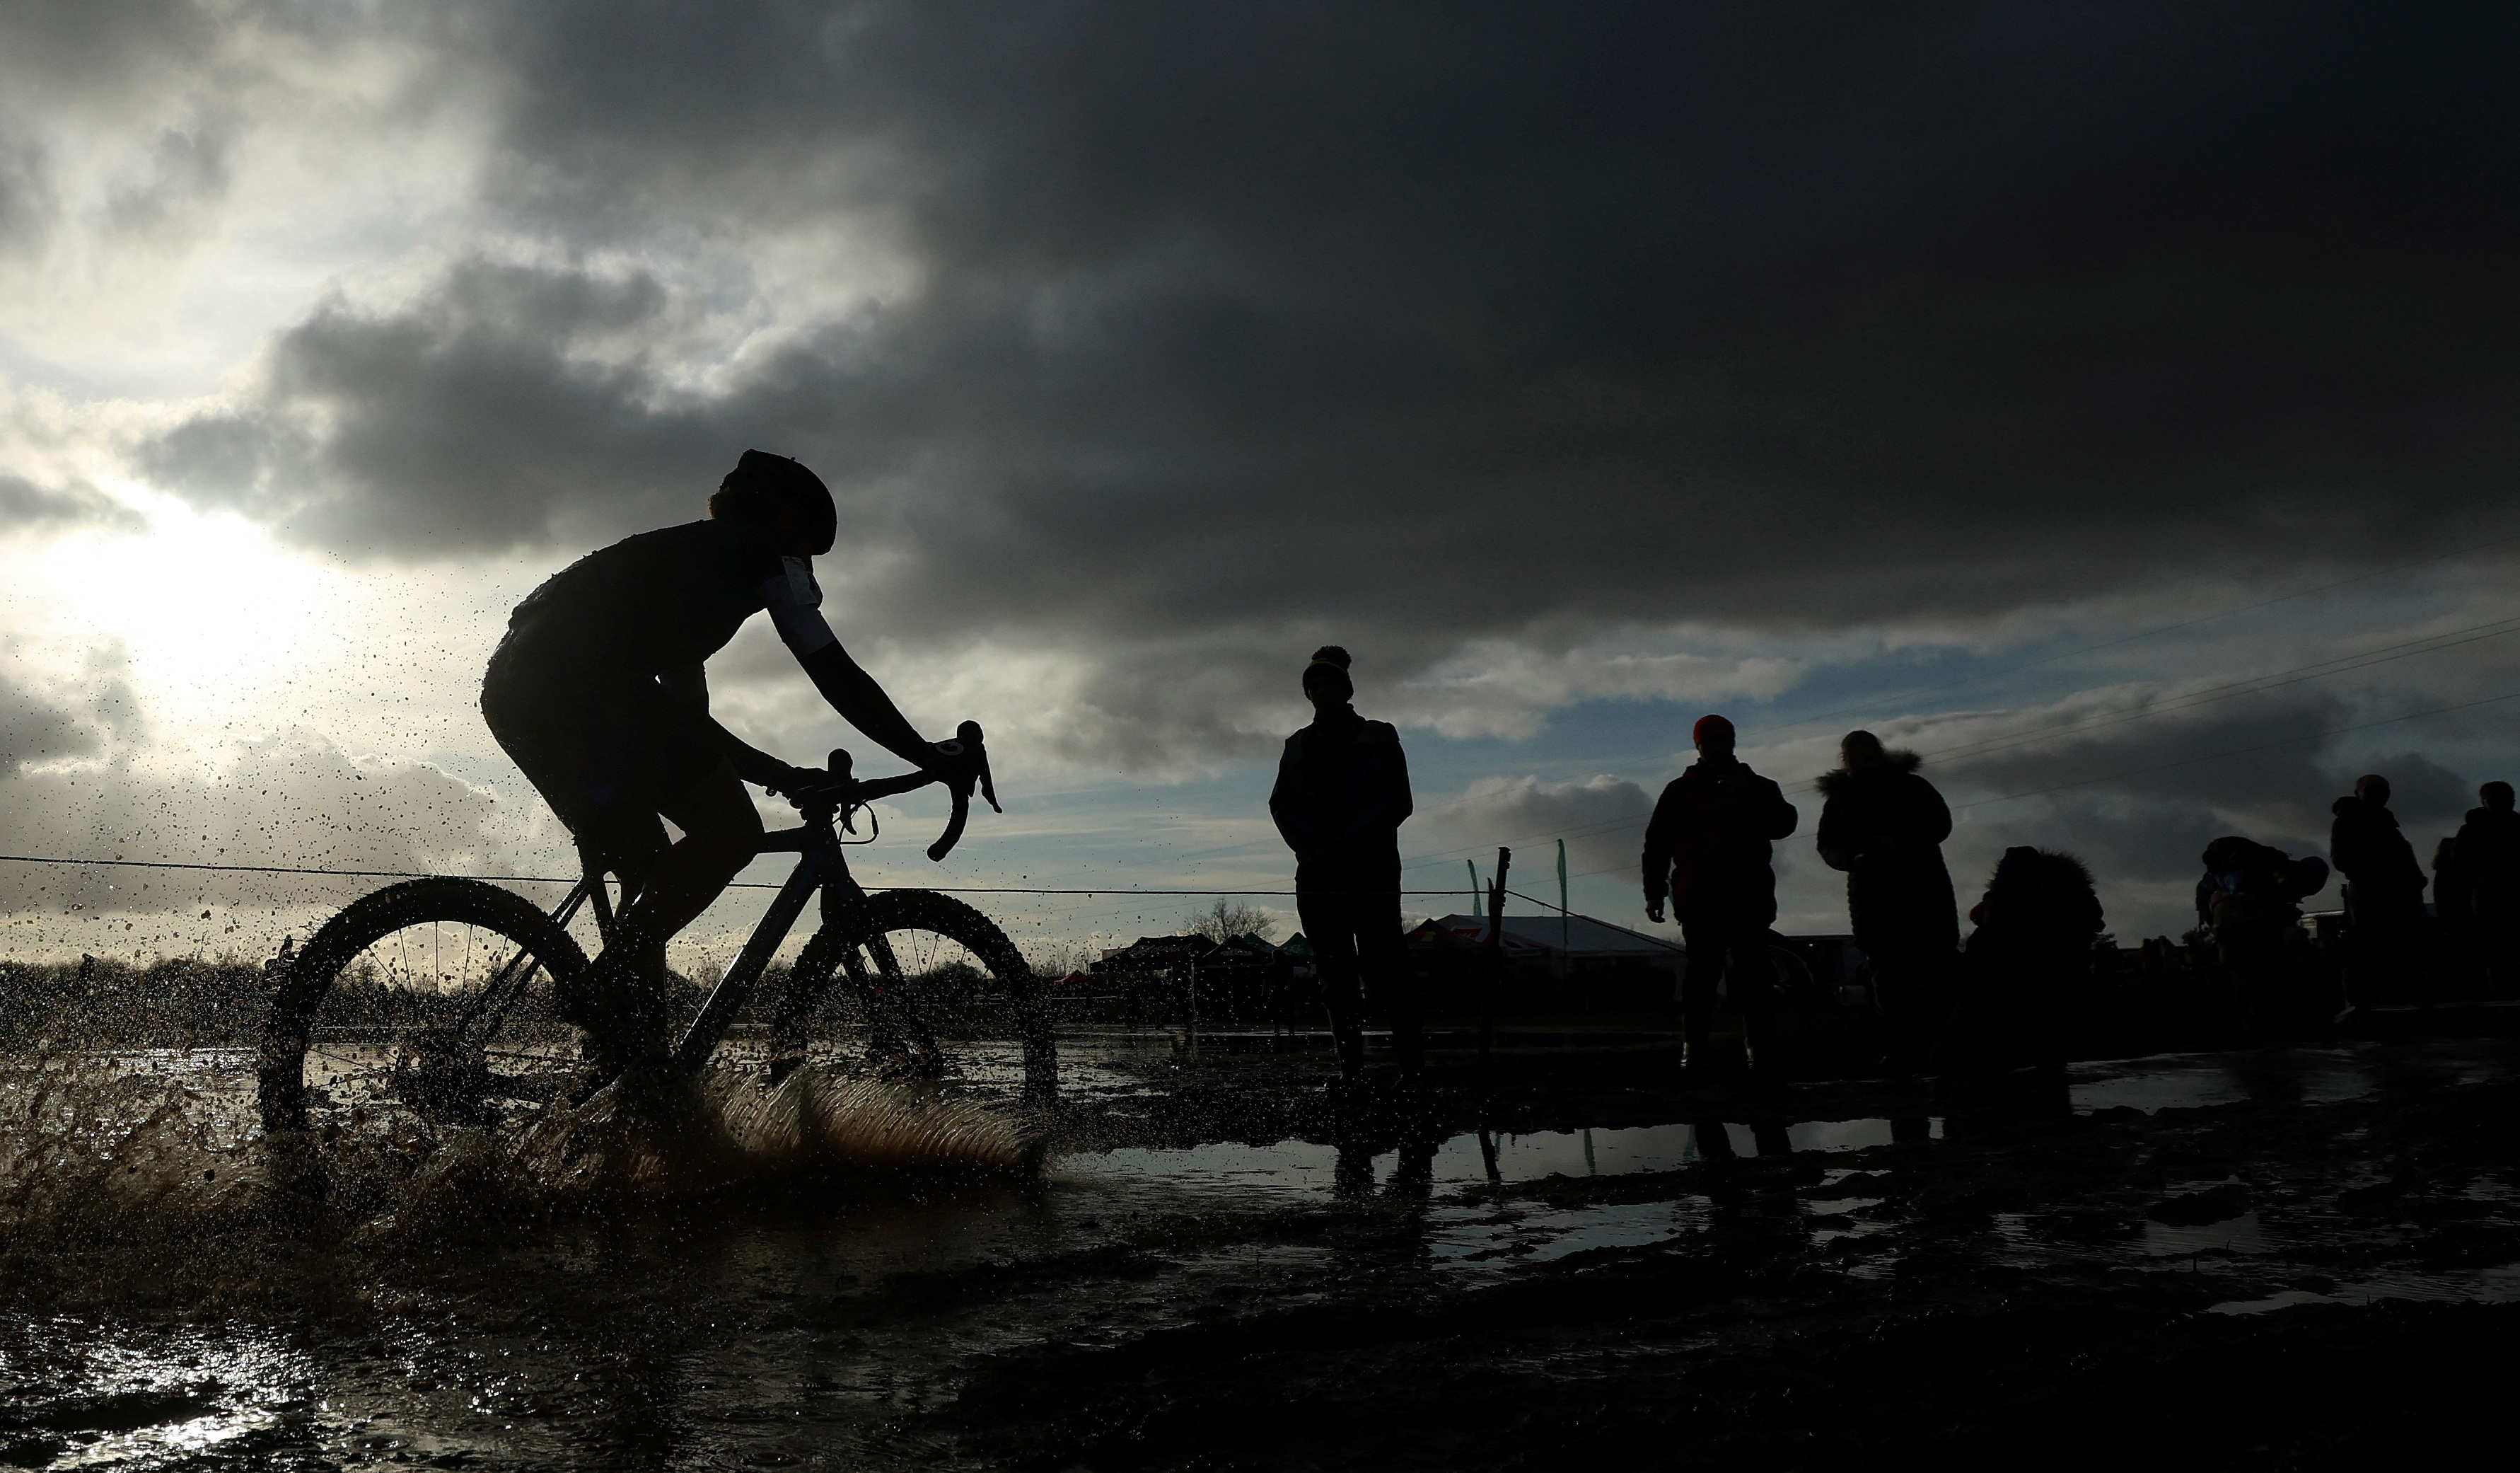 A competitor cycles through a puddle during the Senior Women's race at the British Cyclocross championships near Milnthorpe